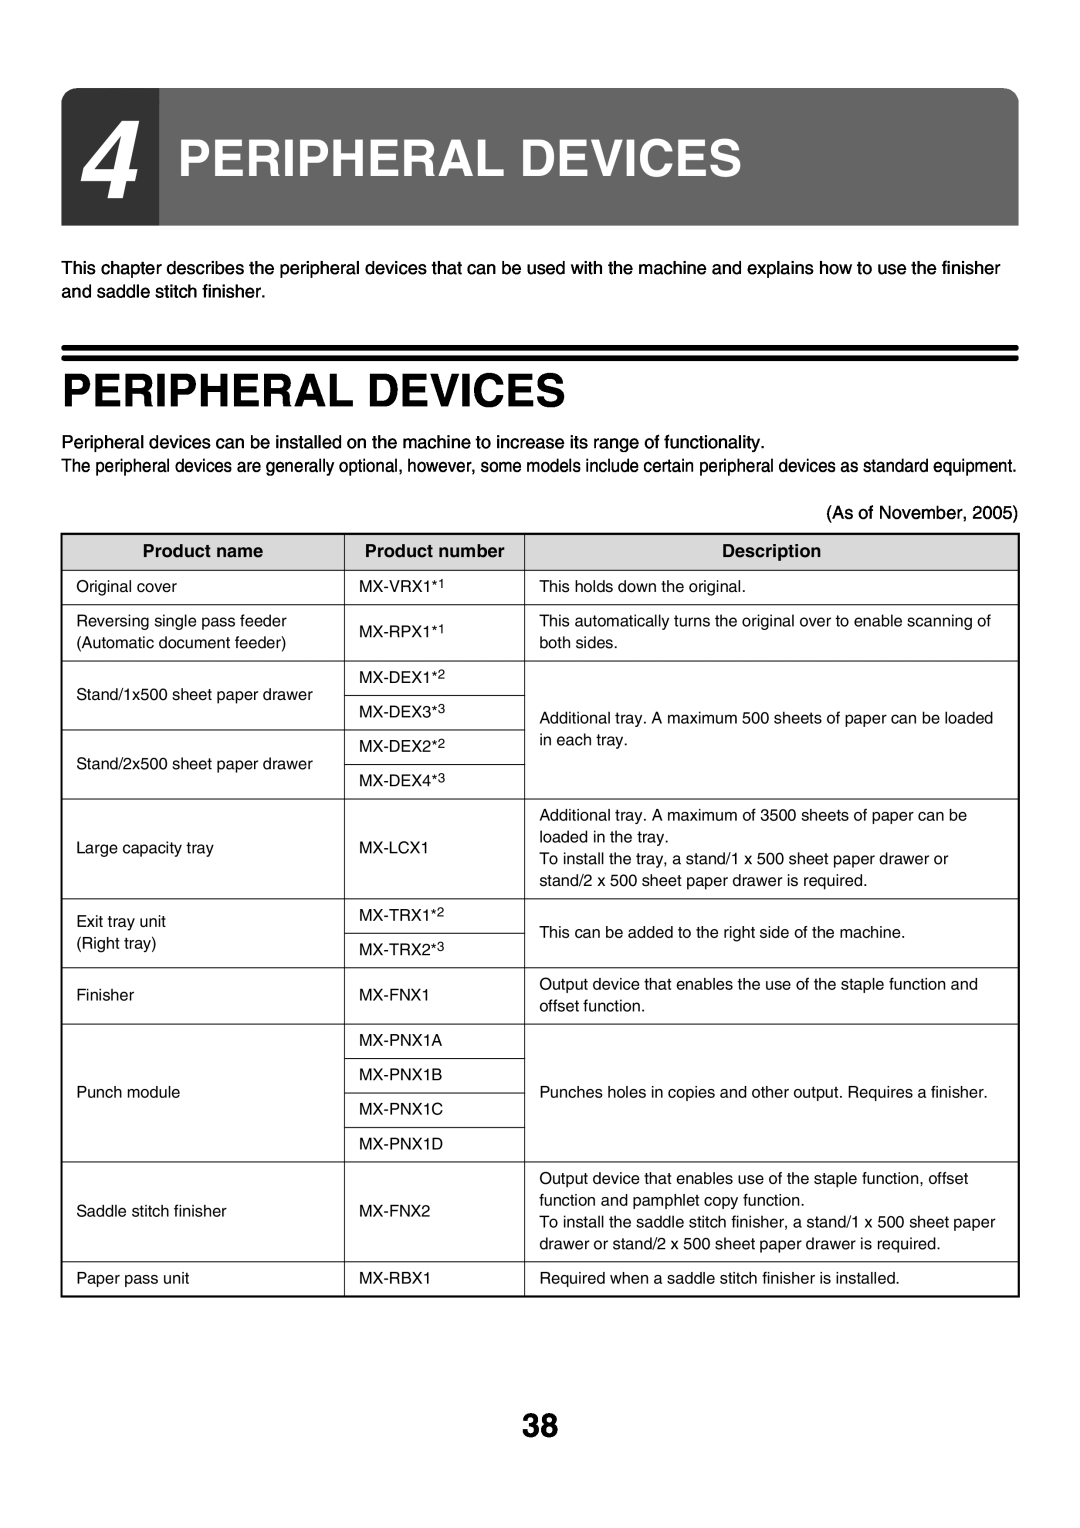 Sharp MX-3500N manual Peripheral Devices, Product name, Product number, Description 